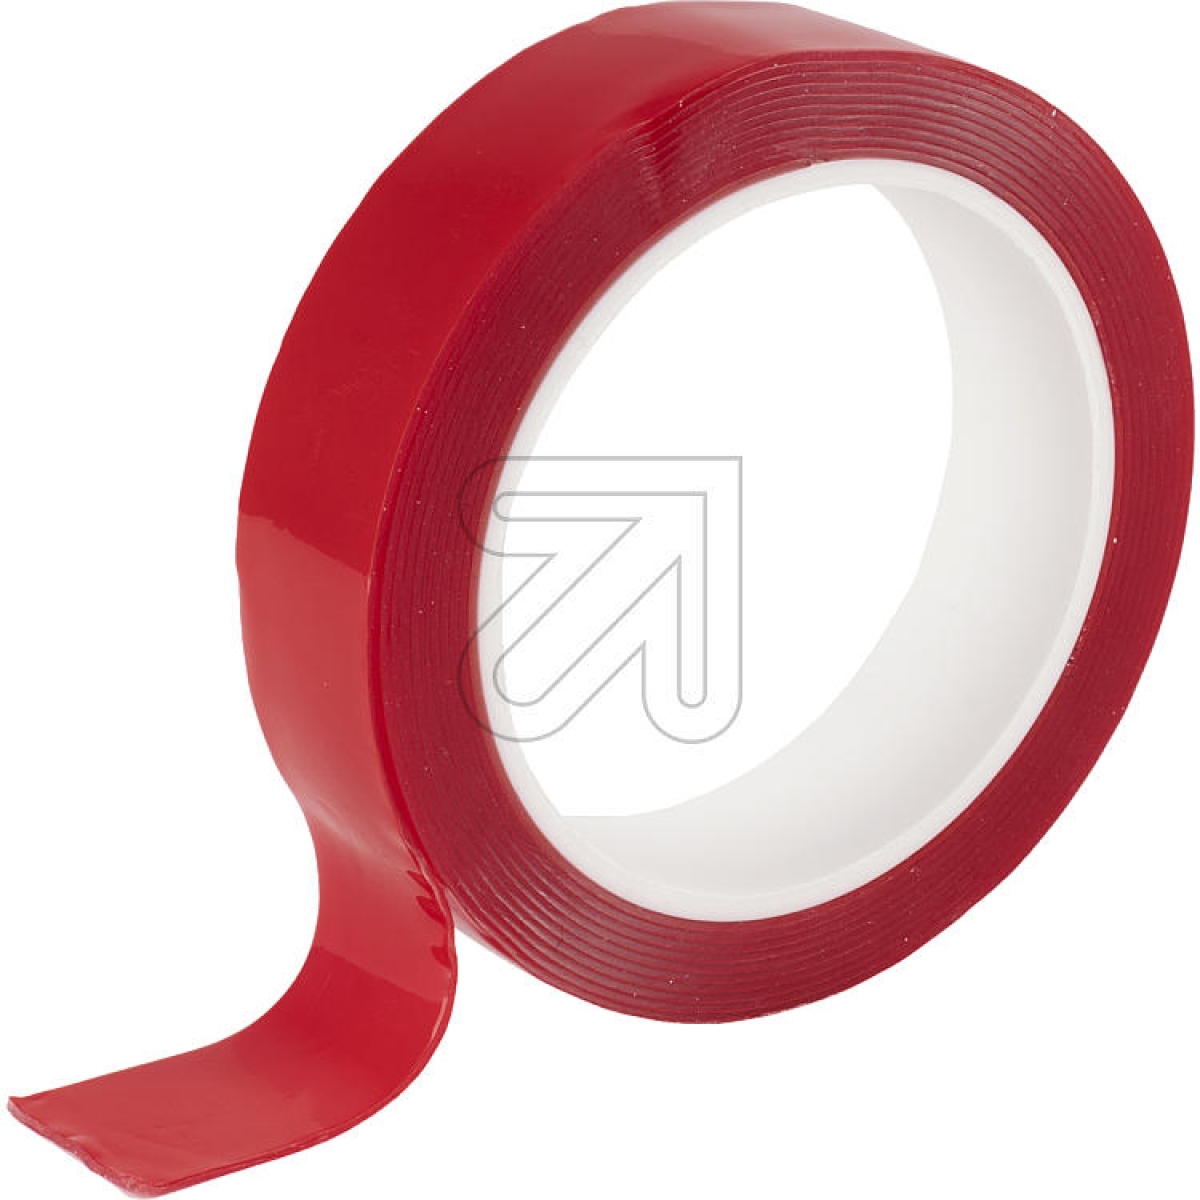 S-ConnMontage nano adhesive tape, 2mm, acrylic, transparent, 5m 18-15002Article-No: 720260